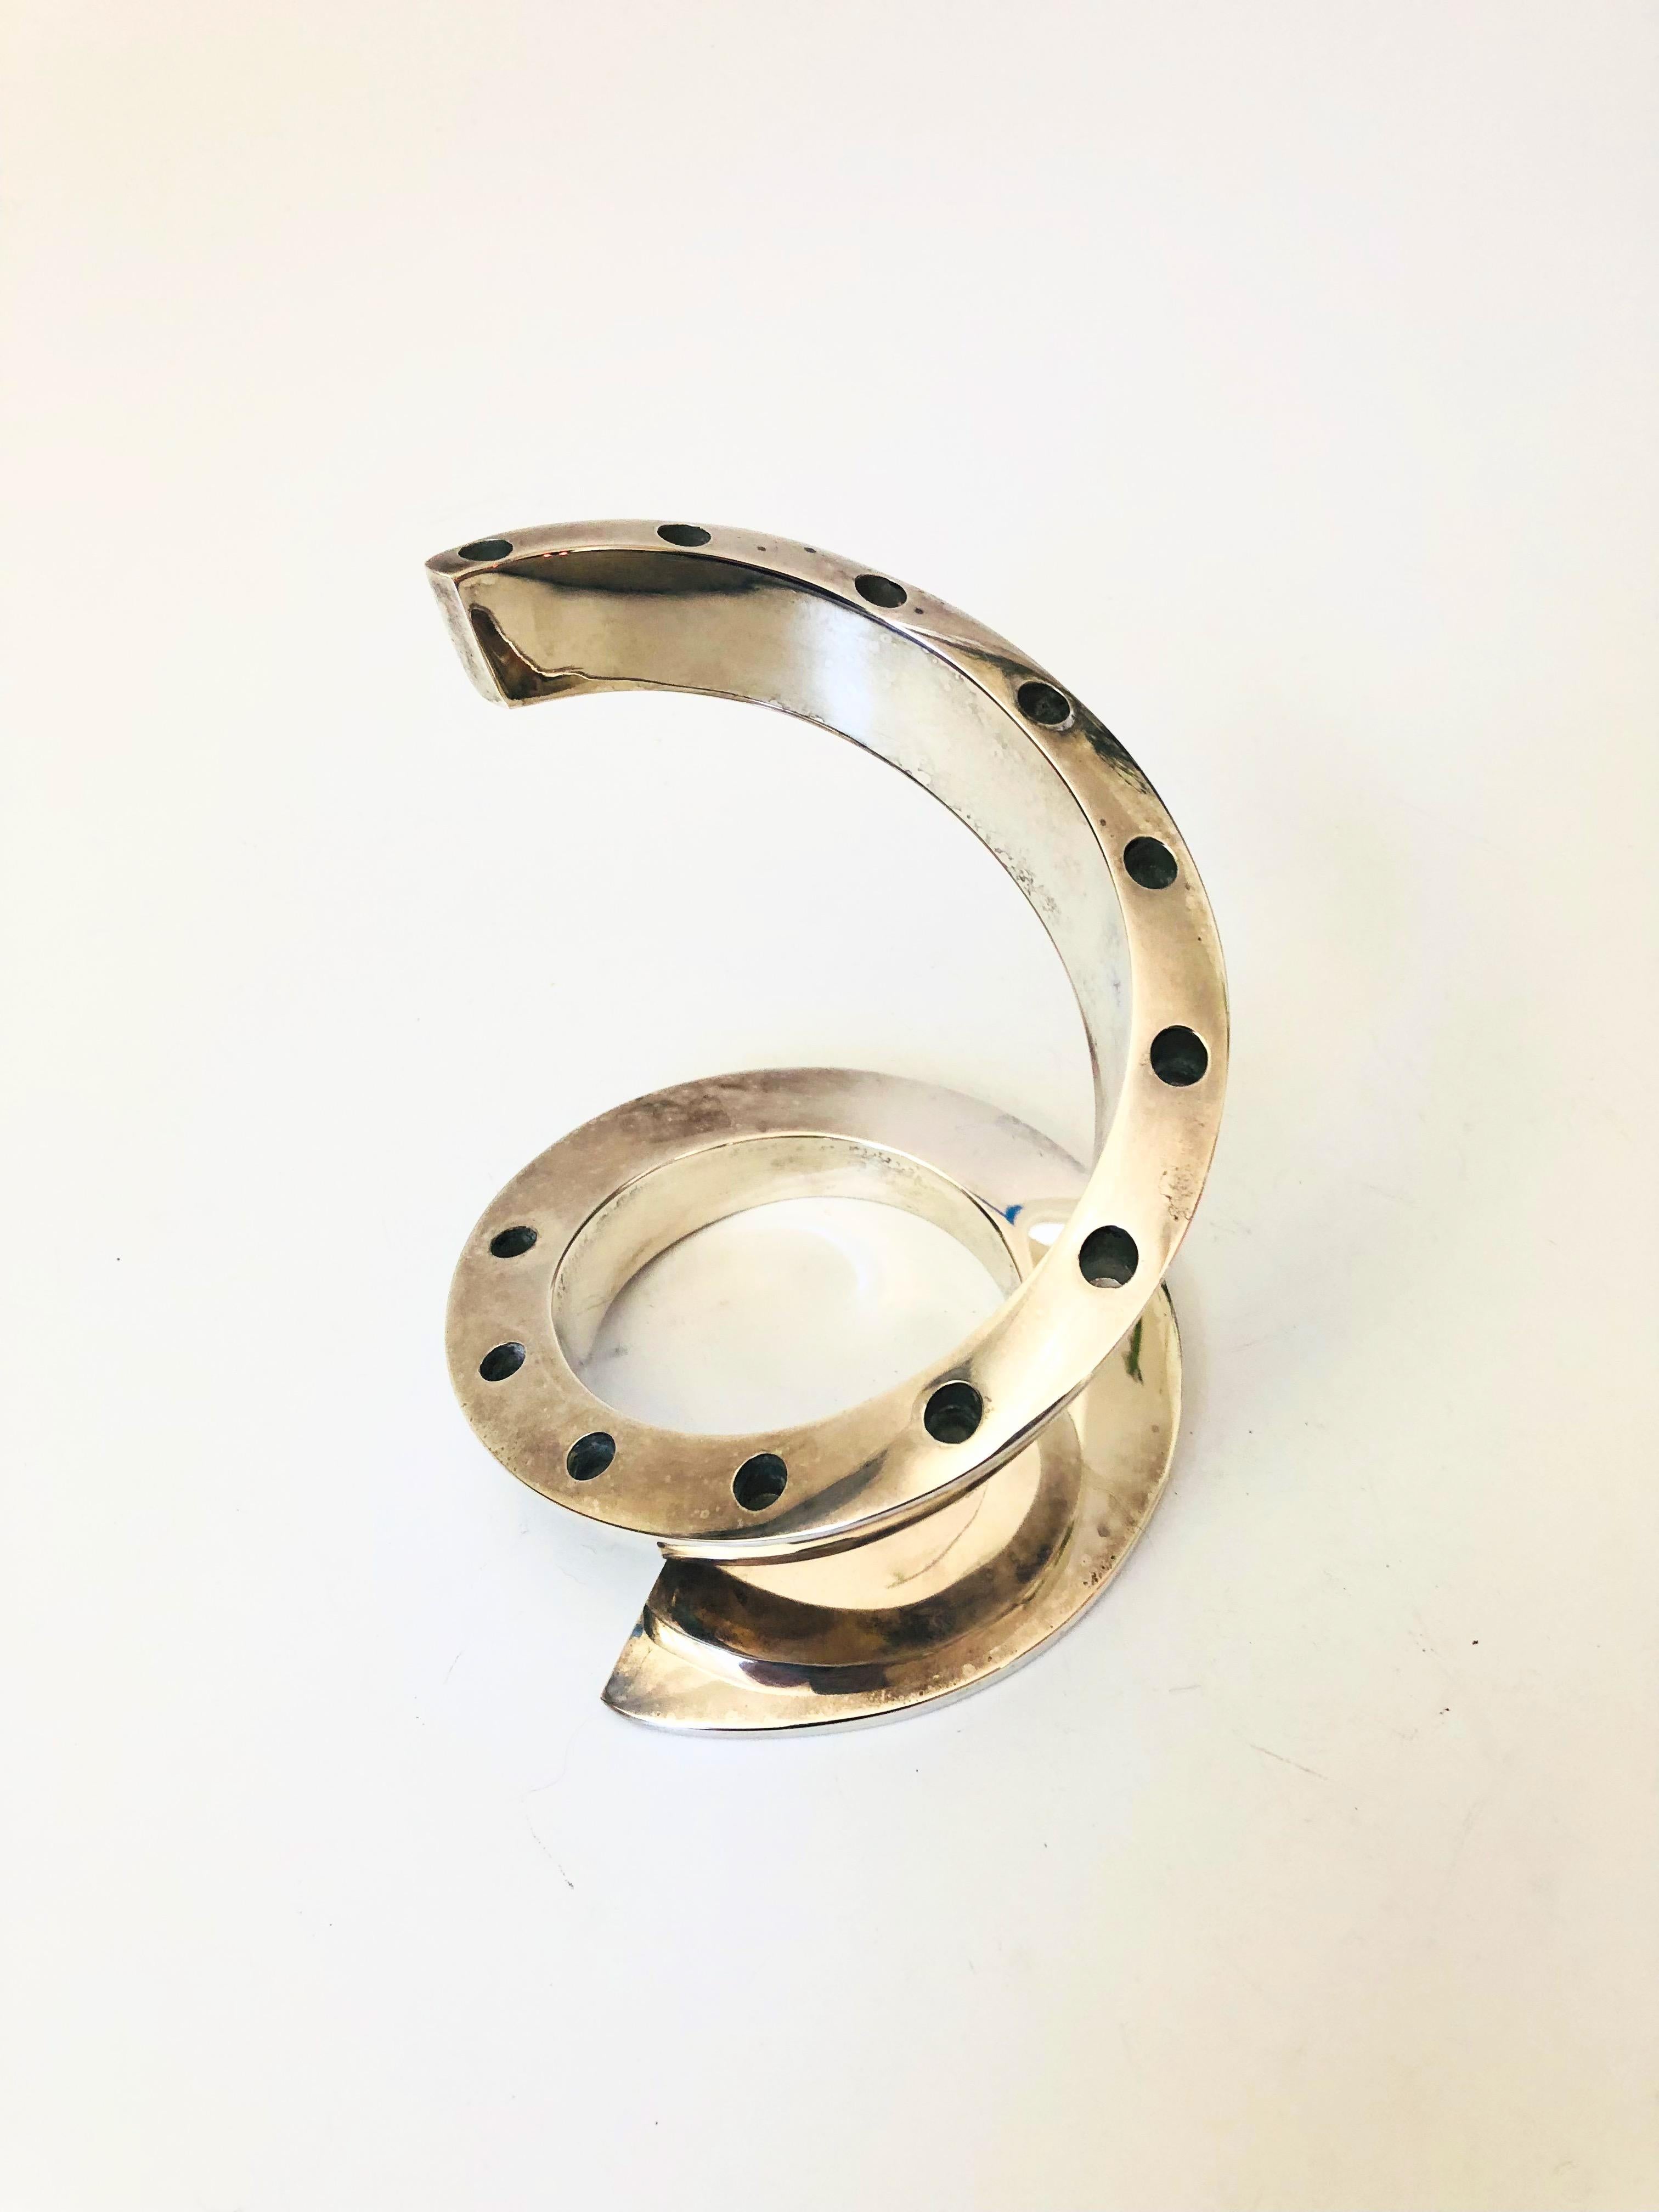 A mid-century silver plate candle holder designed by Bertil Vallien for Dansk. Great sculptural spiral shape, holding up to 12 tiny taper candles. Marked 